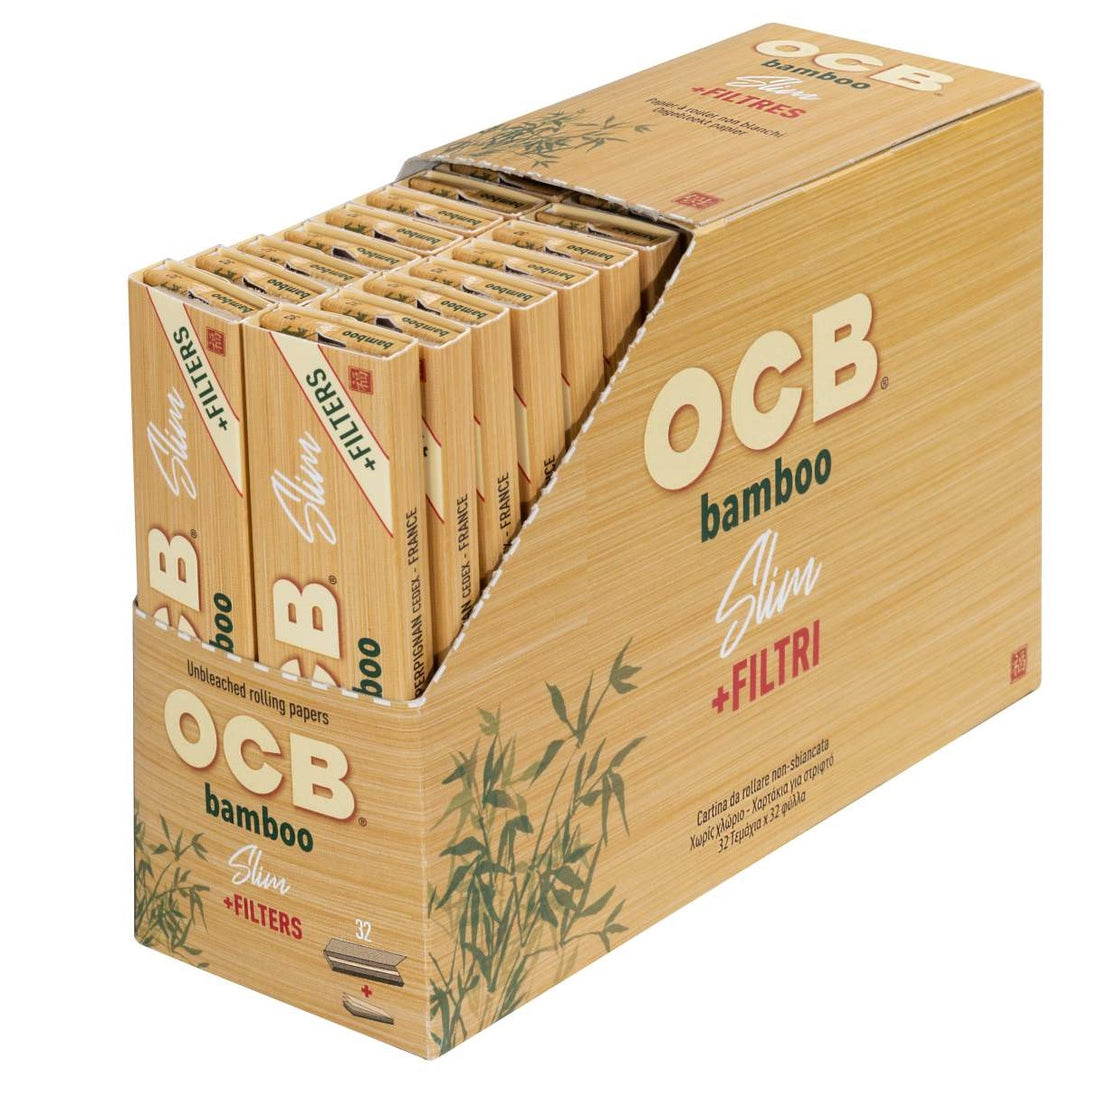 OCB Bamboo Slim with Filters